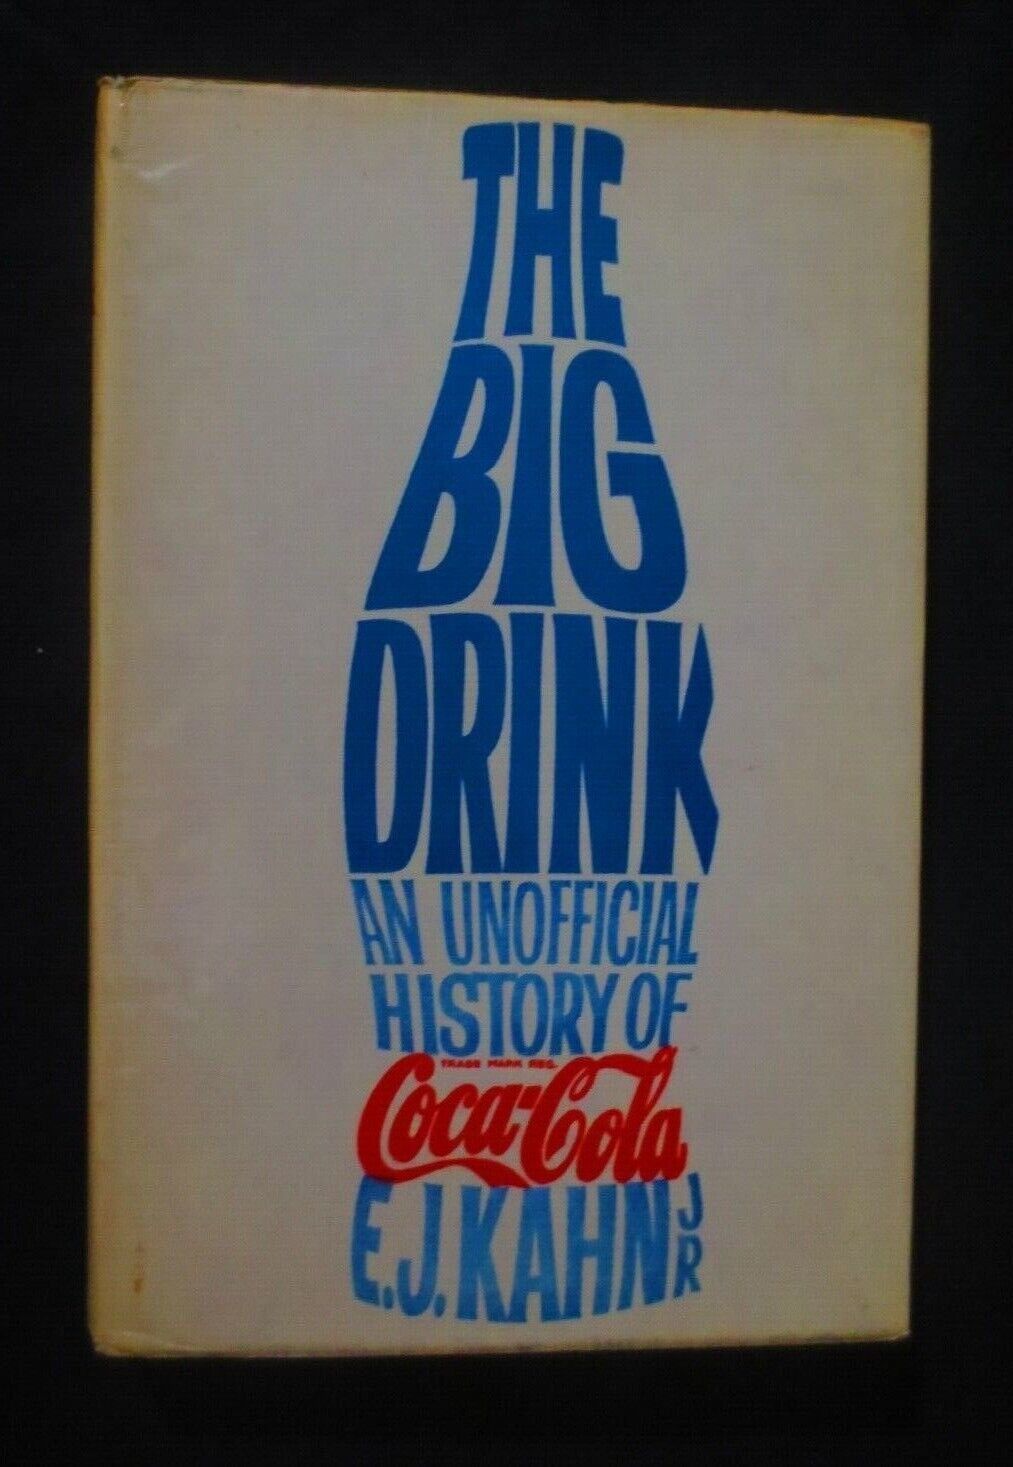 Primary image for The Big Drink An Unofficial History of Coca Cola hardback  dustcover 179 pgs